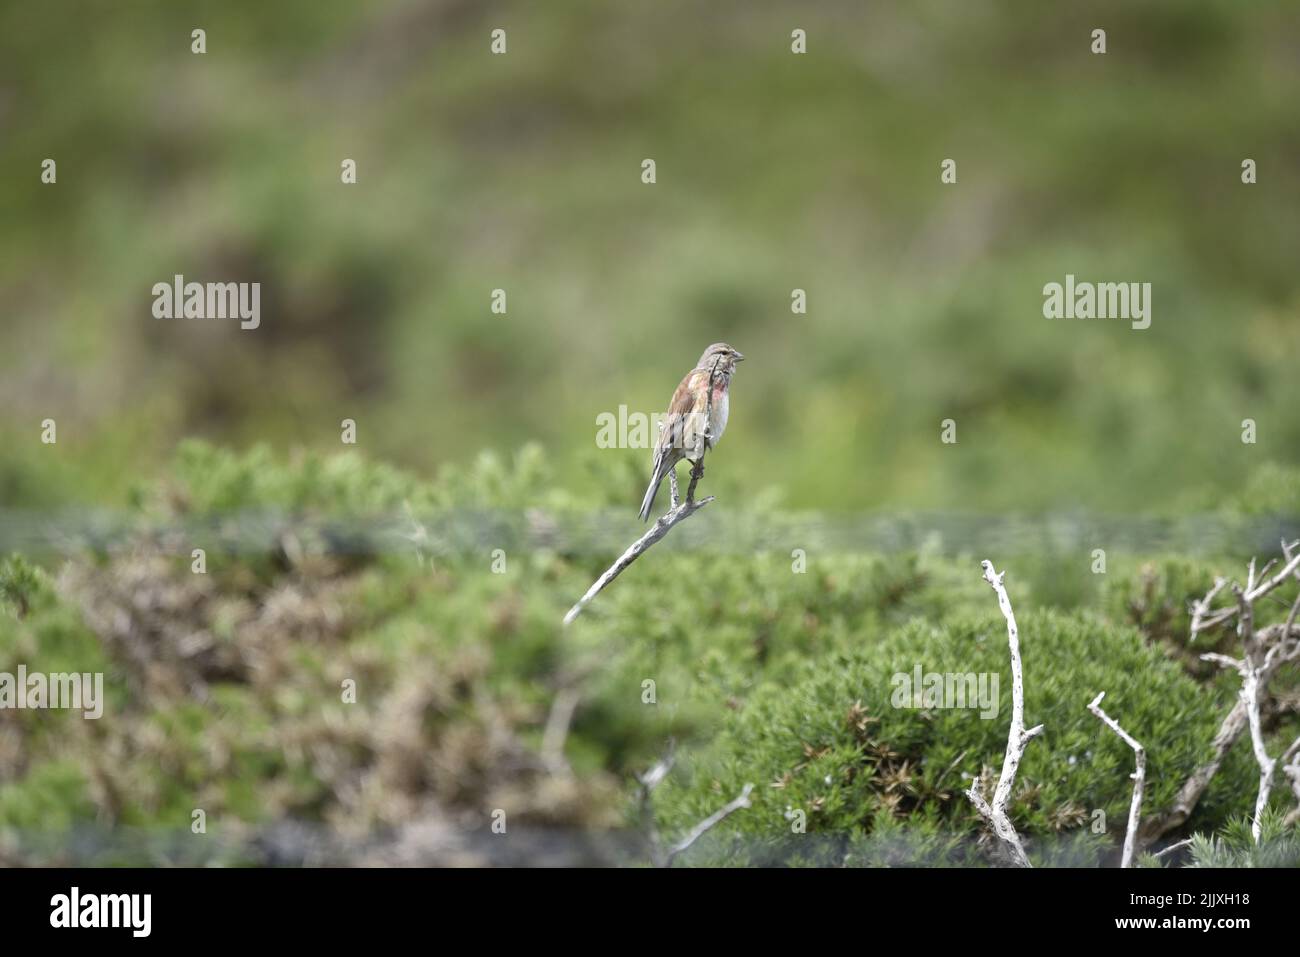 Male Common Linnet (Carduelis cannabina) Perched in Right-Profile on Top of a Bare Twig, Middle of Image, on the Isle of Man, UK in Spring Stock Photo